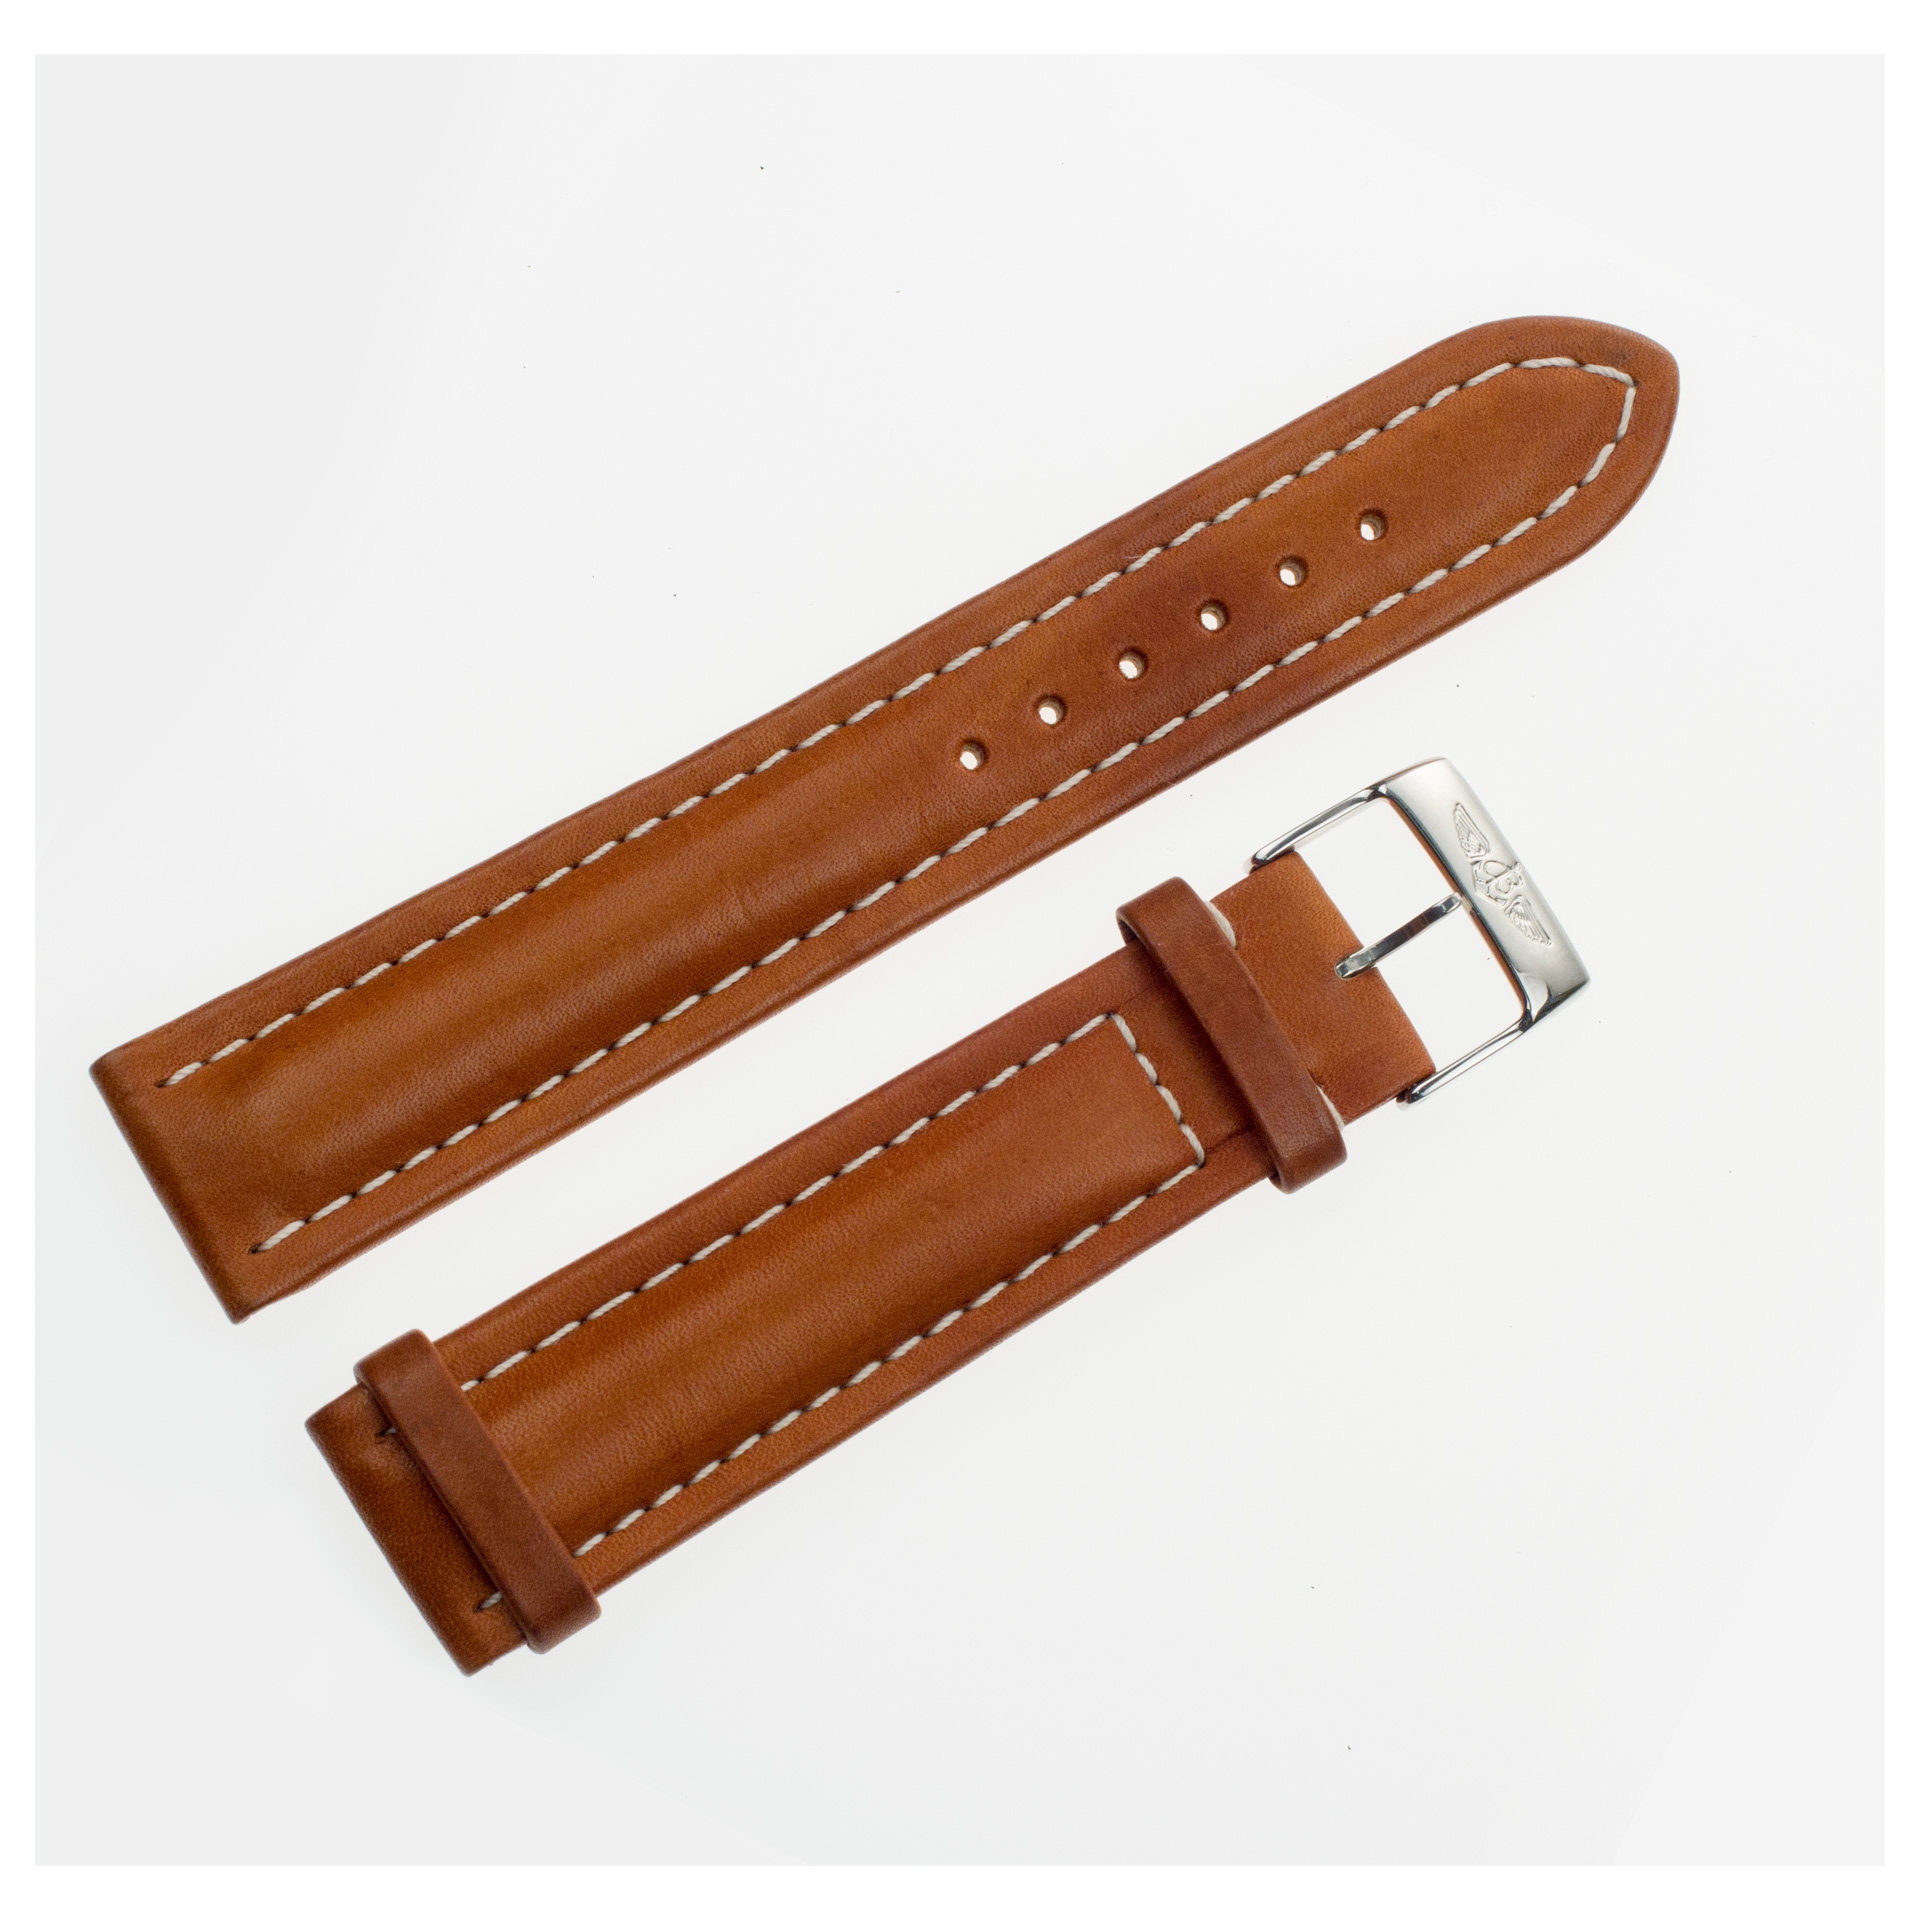 Breitling Leather Strap (20x18) With A Buckle. Length Of 4.75" Long Piece And 3" Short Piece. image 1